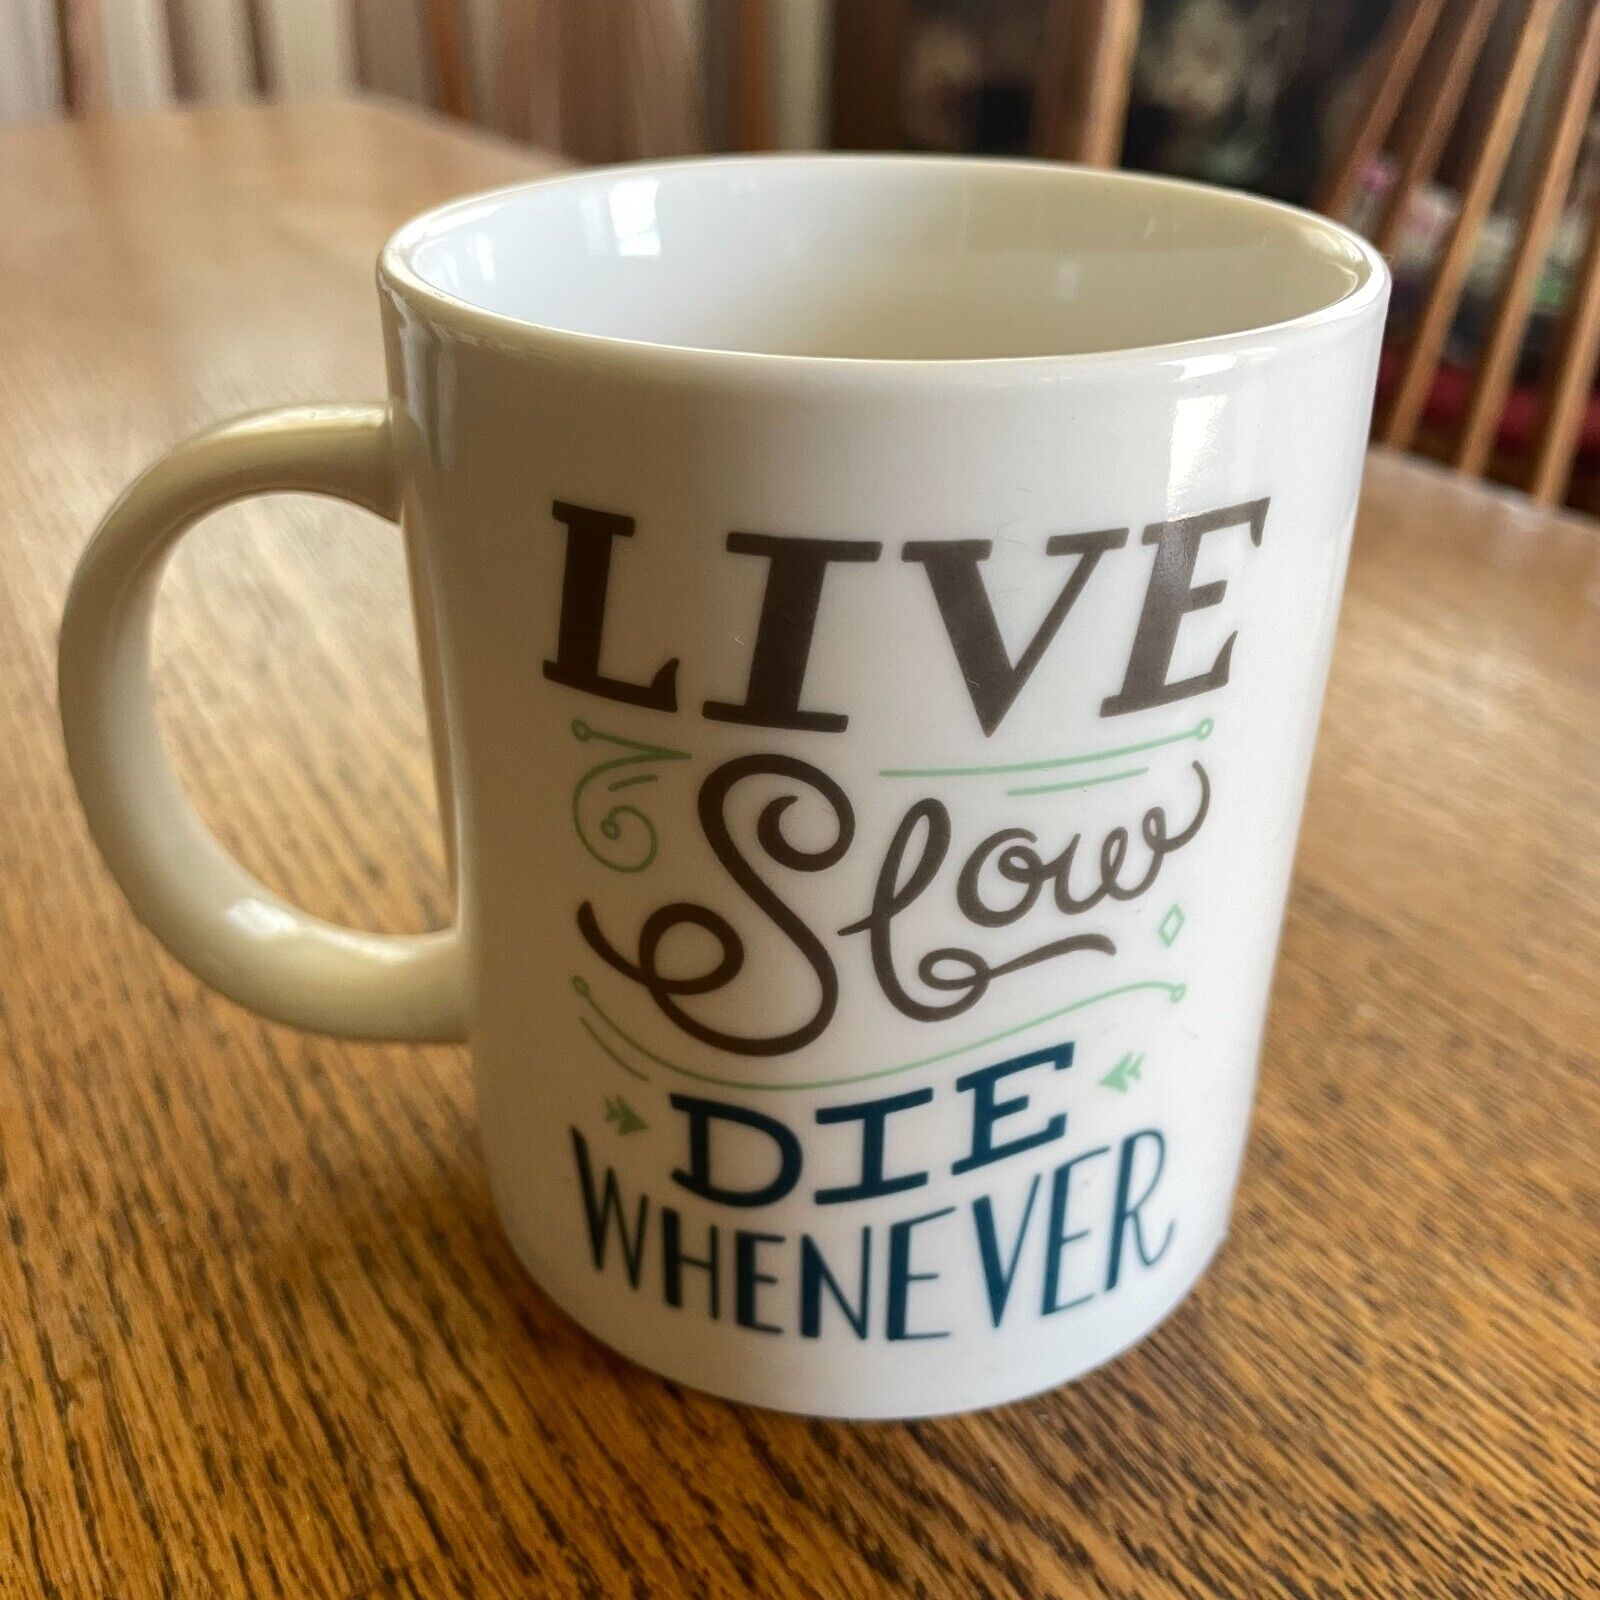 Live Slow Die Whenever Coffee Cup Mug 11 ounces Fred And Friends Brand